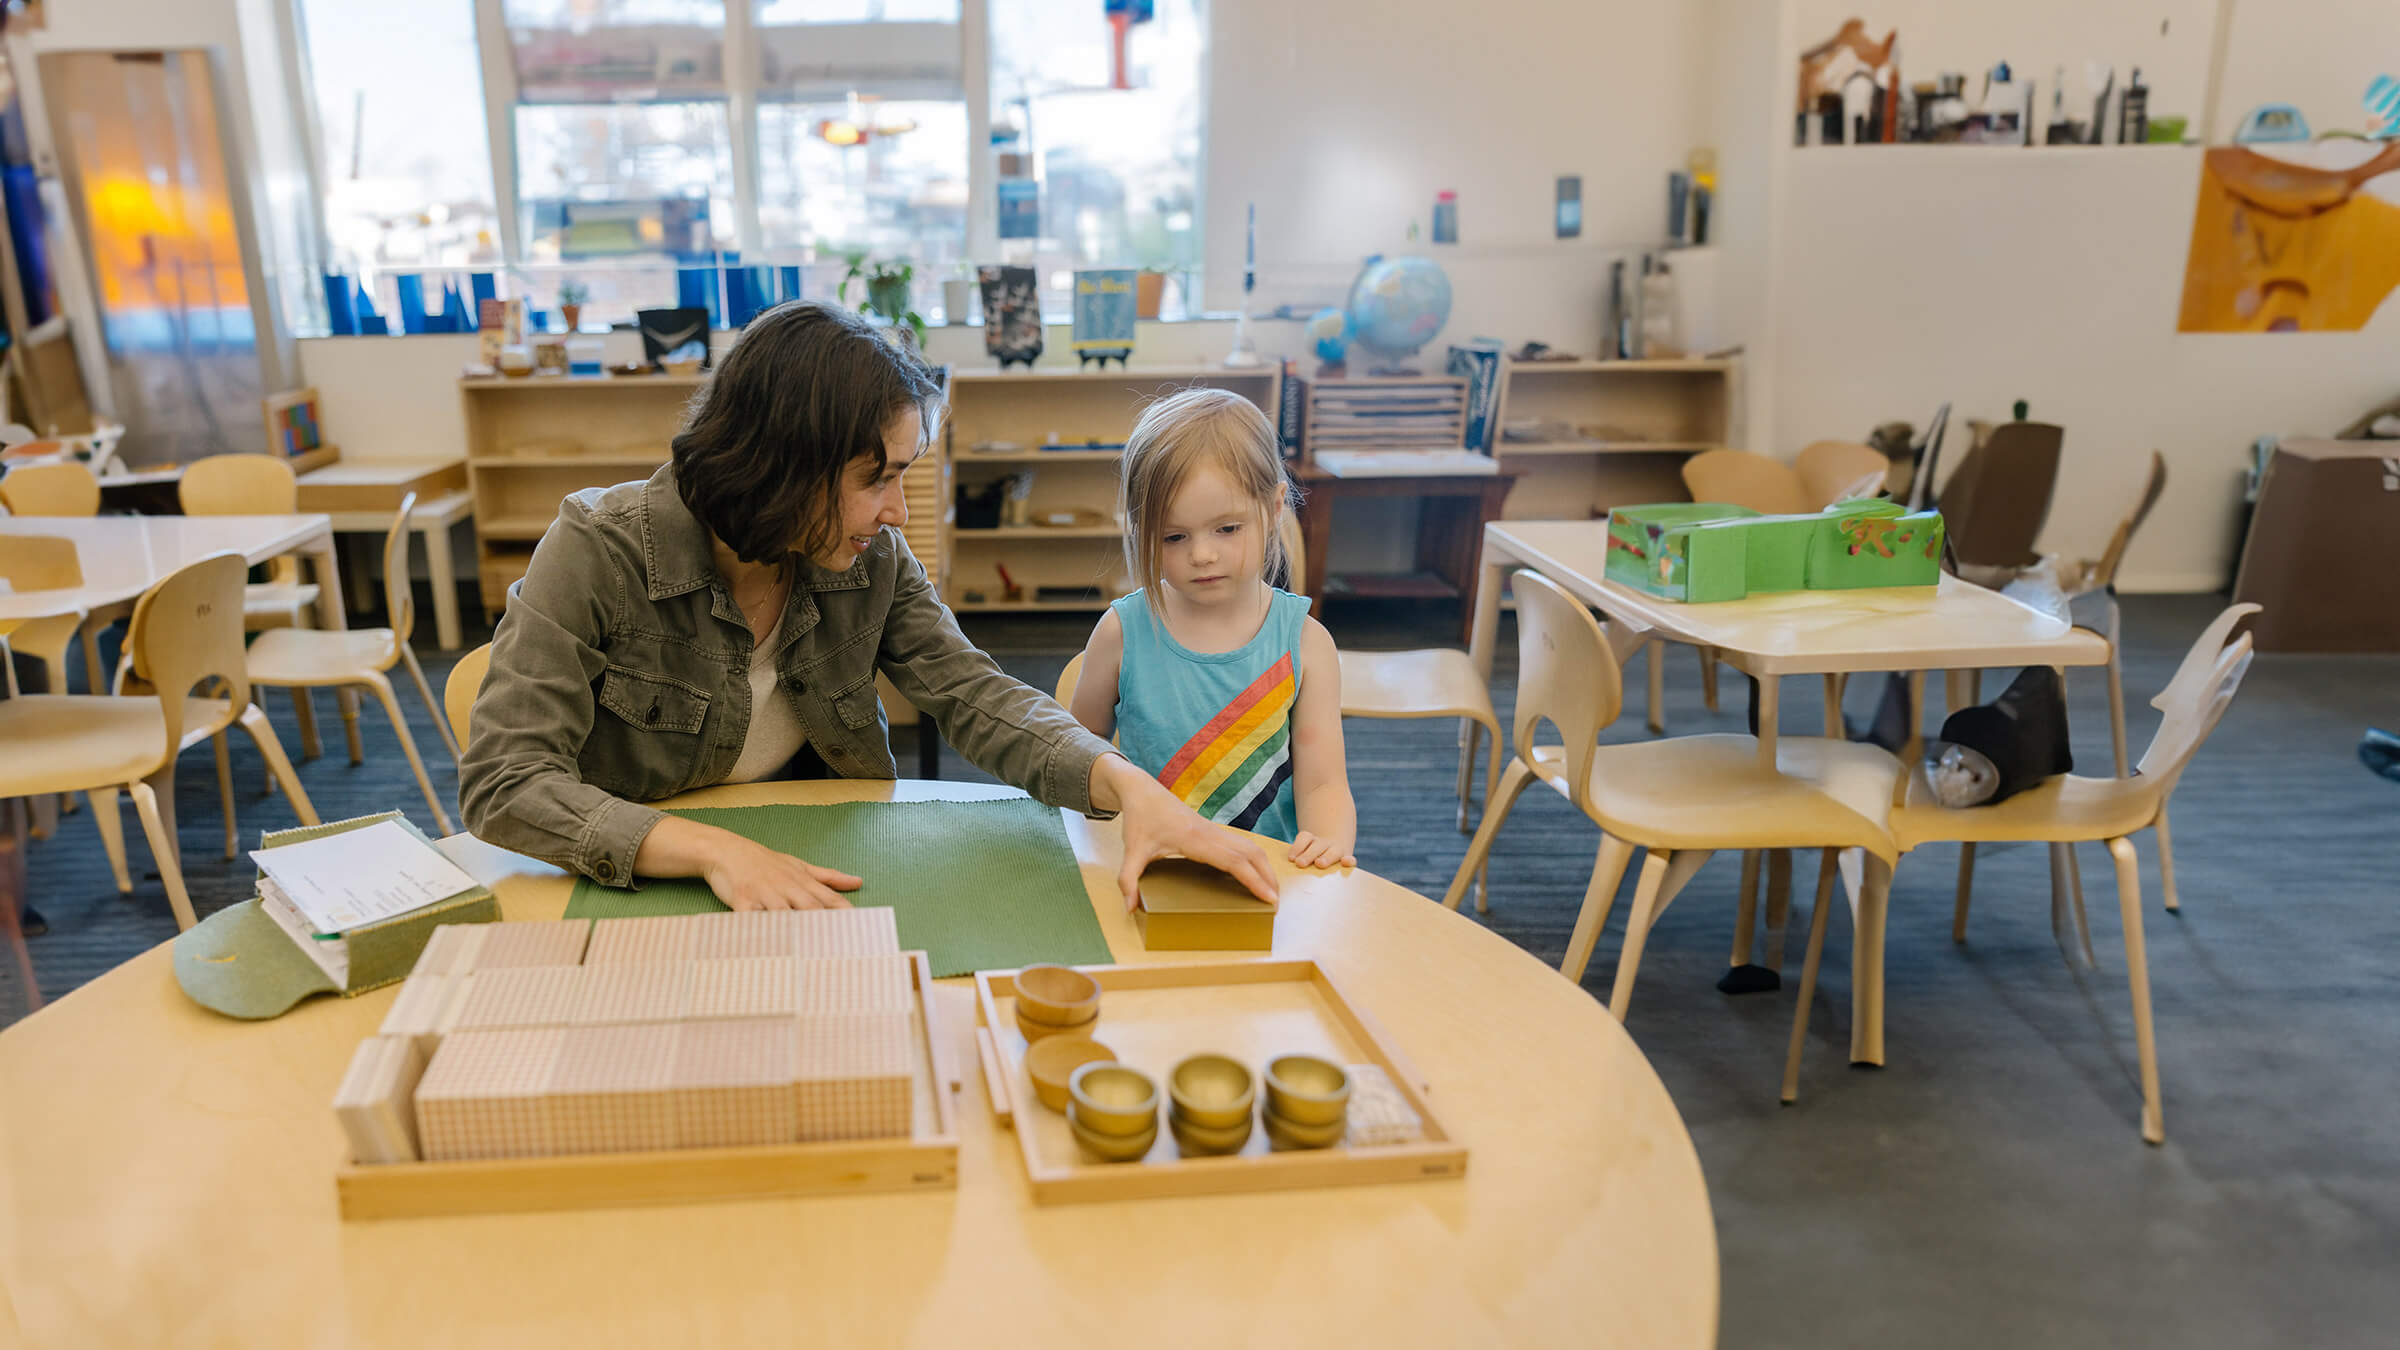 A teacher and young student work together at a table in a classroom with educational materials and art supplies.